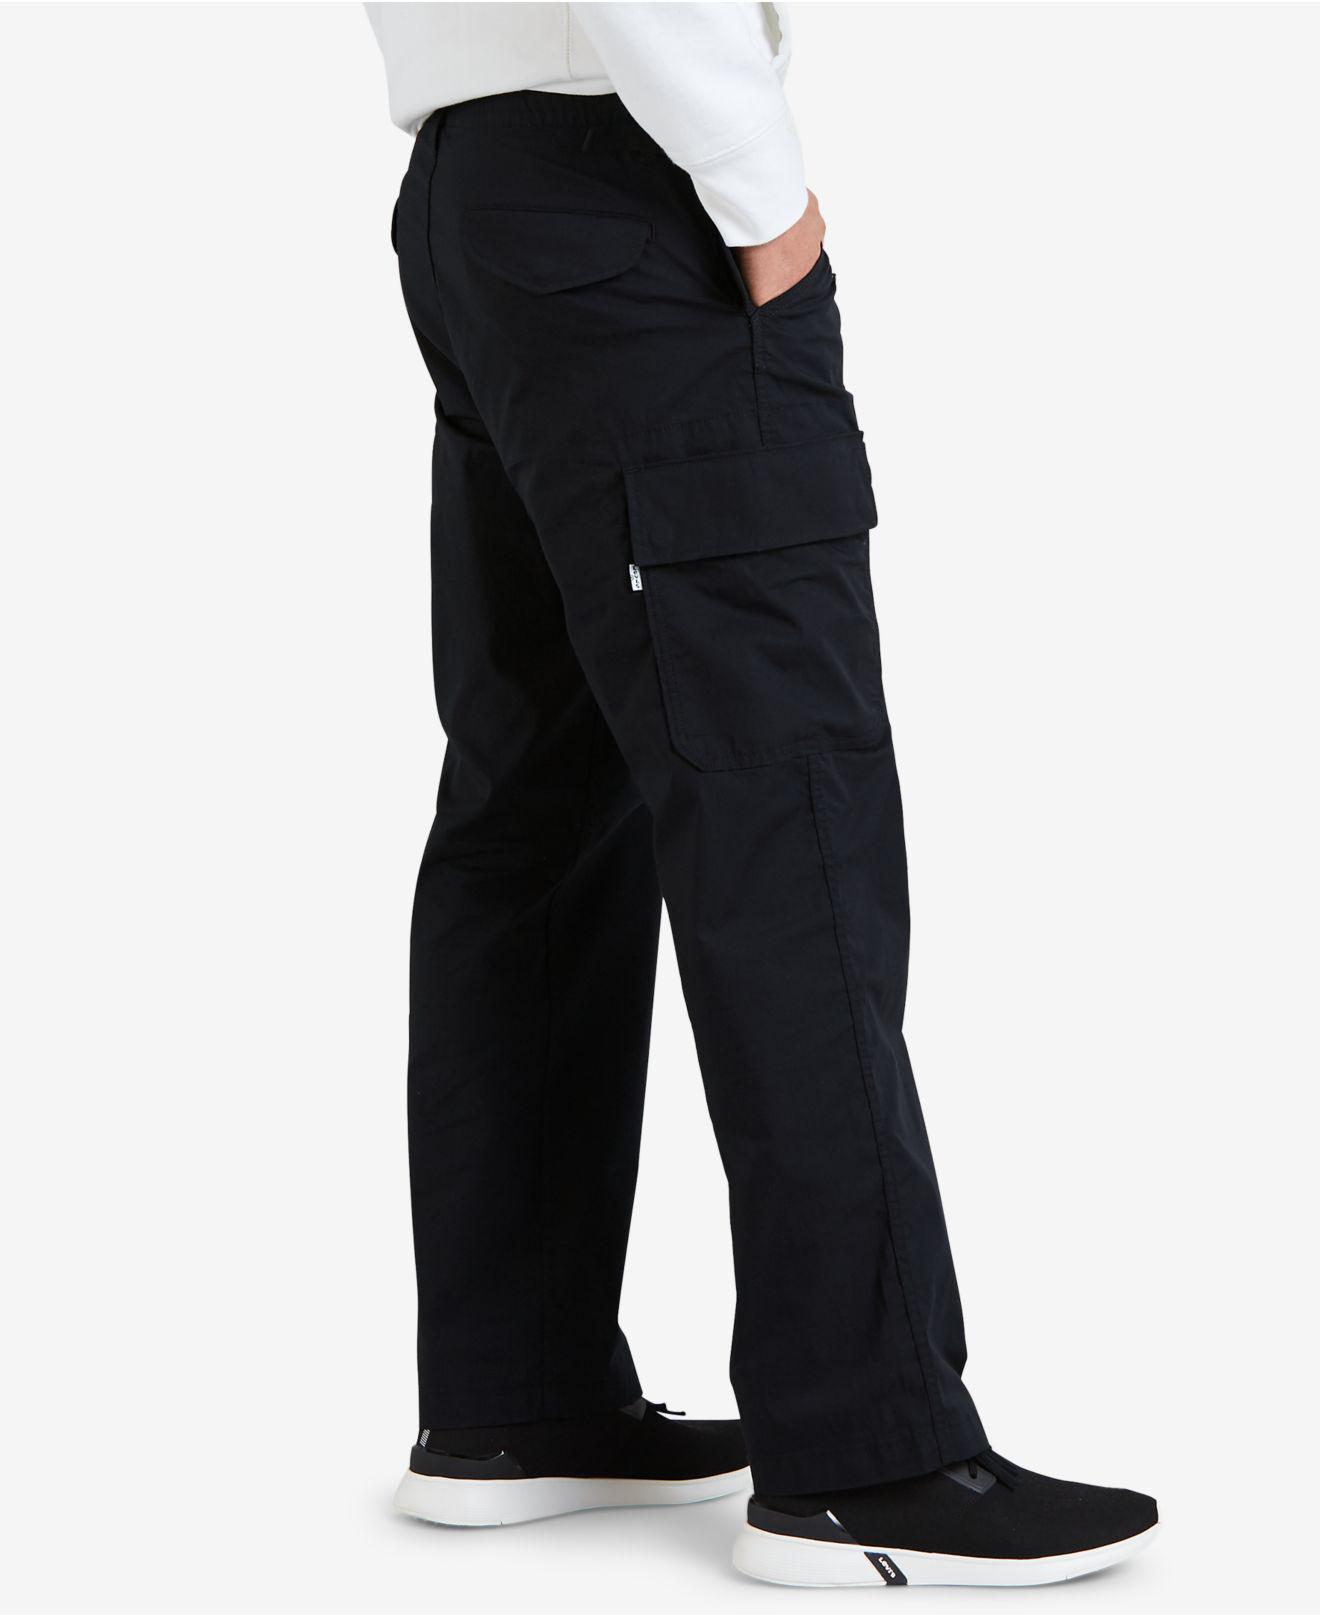 banded carrier cargo pants off 69 